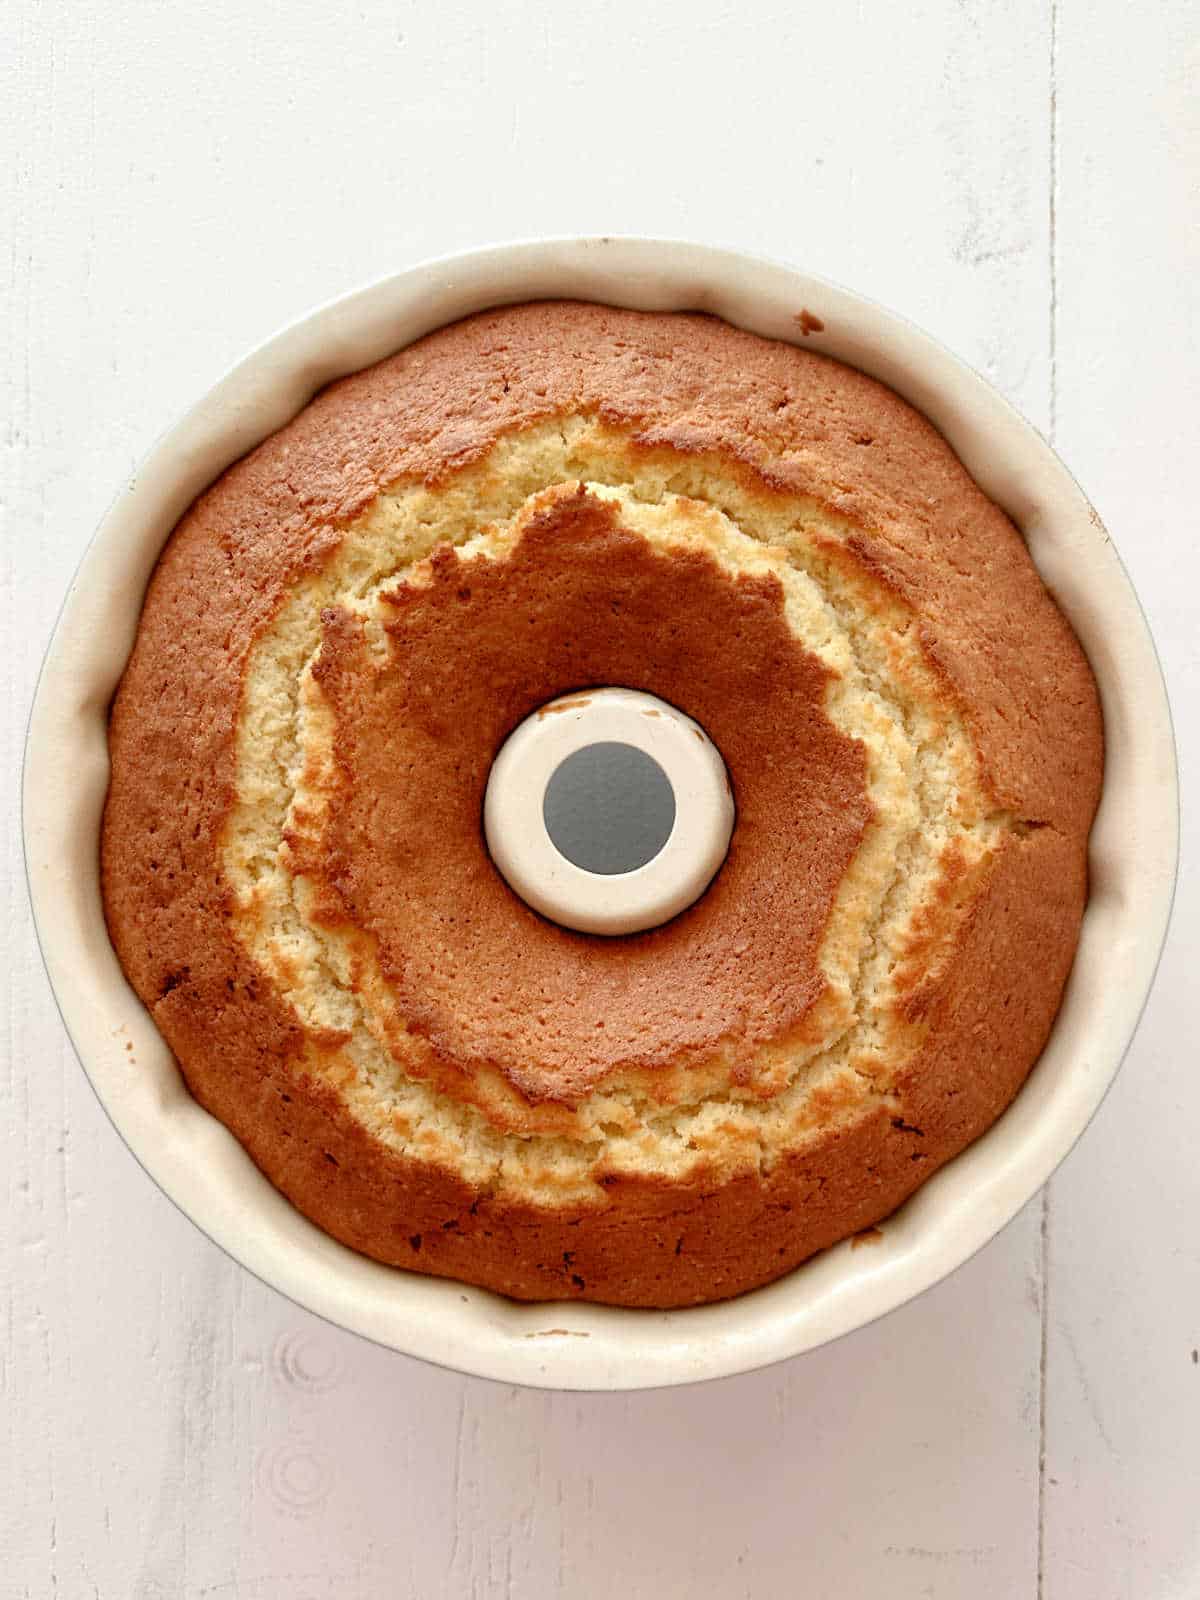 Baked bundt cake in the pan on a white surface. Top view.